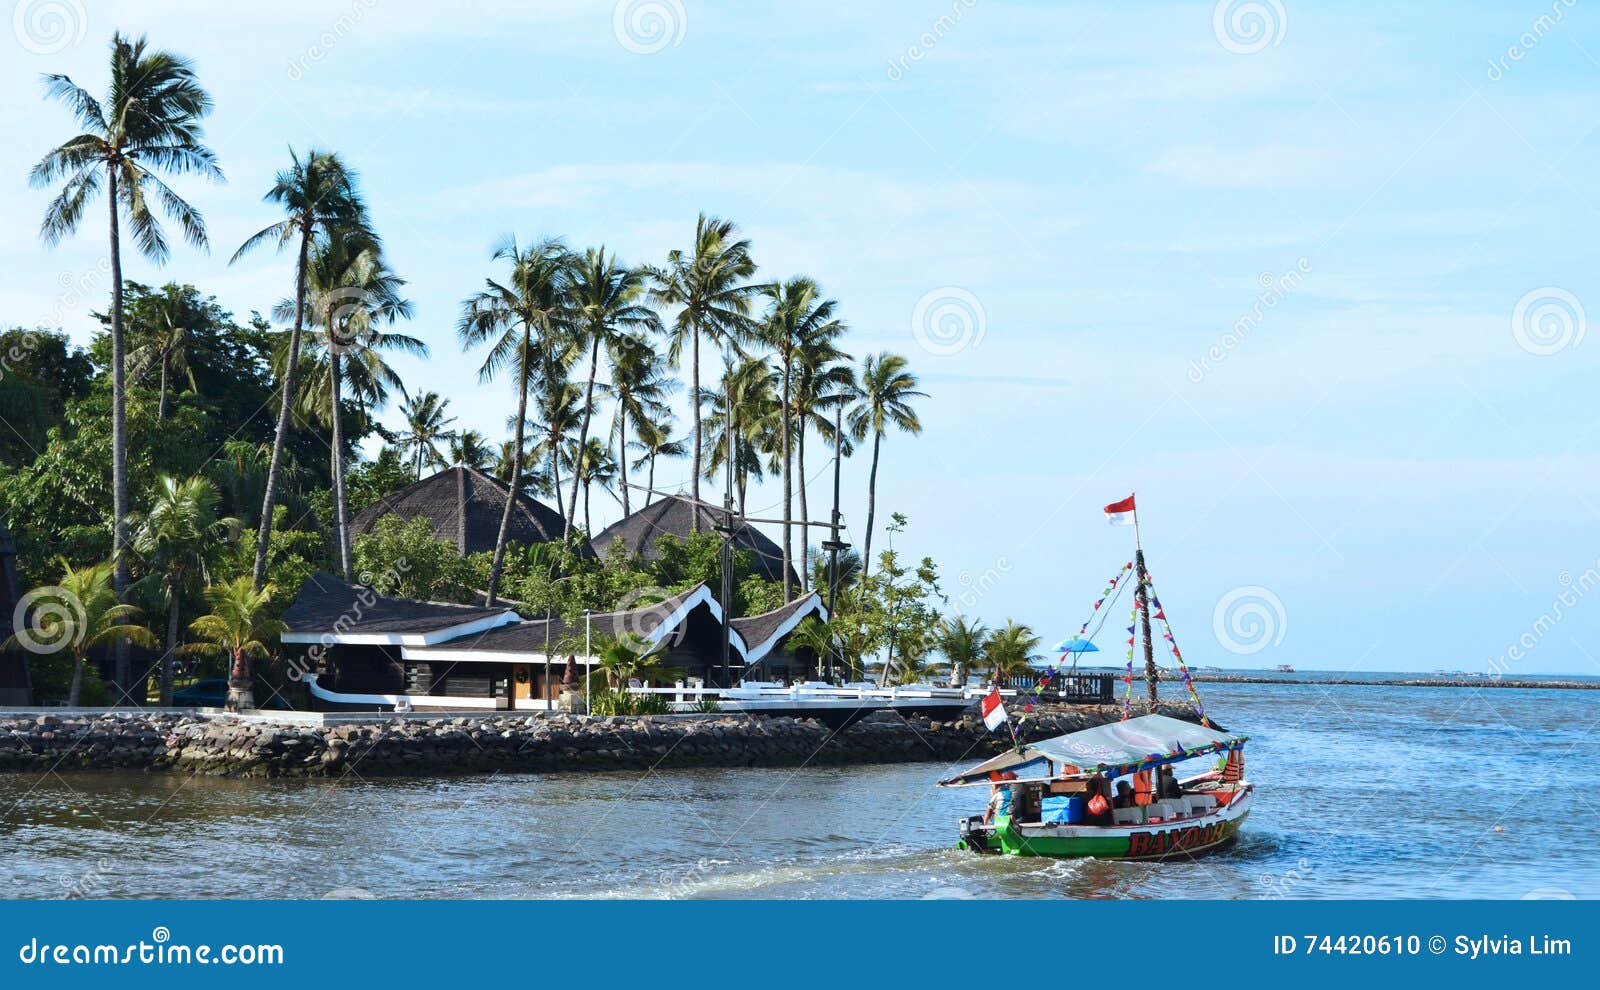 A Well-known Beach In Bandar Jakarta, Indonesia Stock Photo - Image of